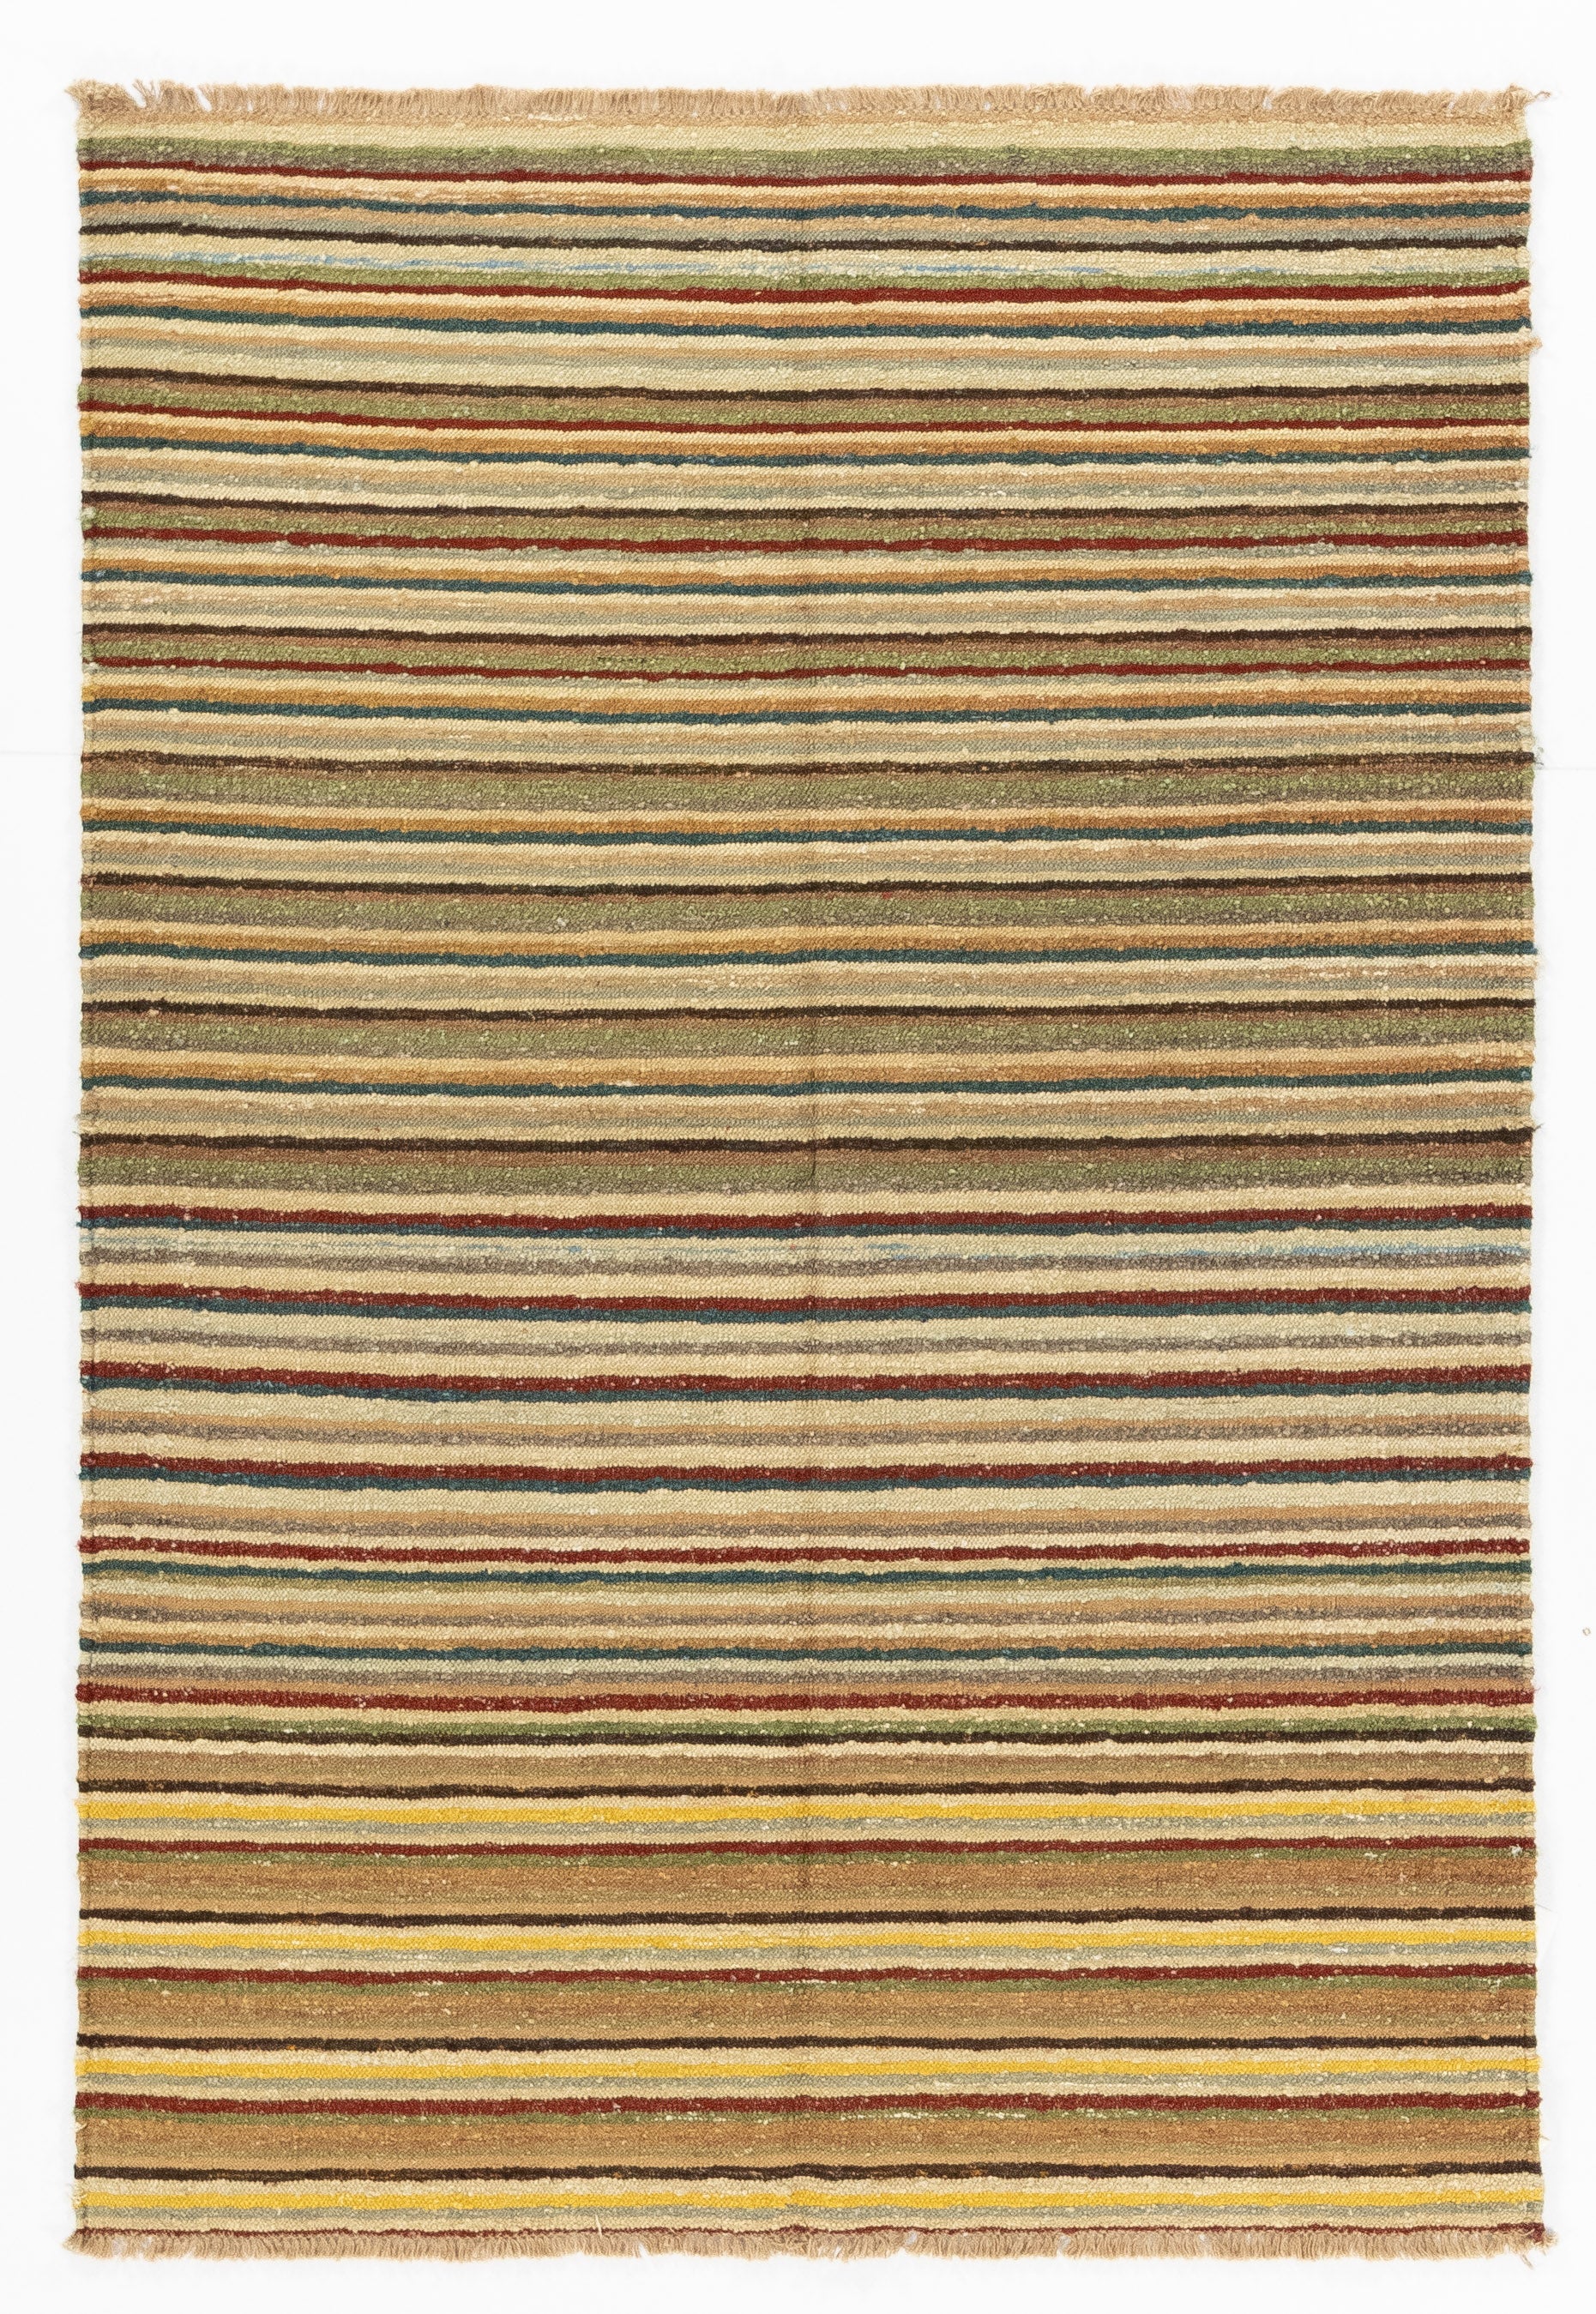 New Indian Contemporary Flatweave Rug <br> 4'0 x 5'11